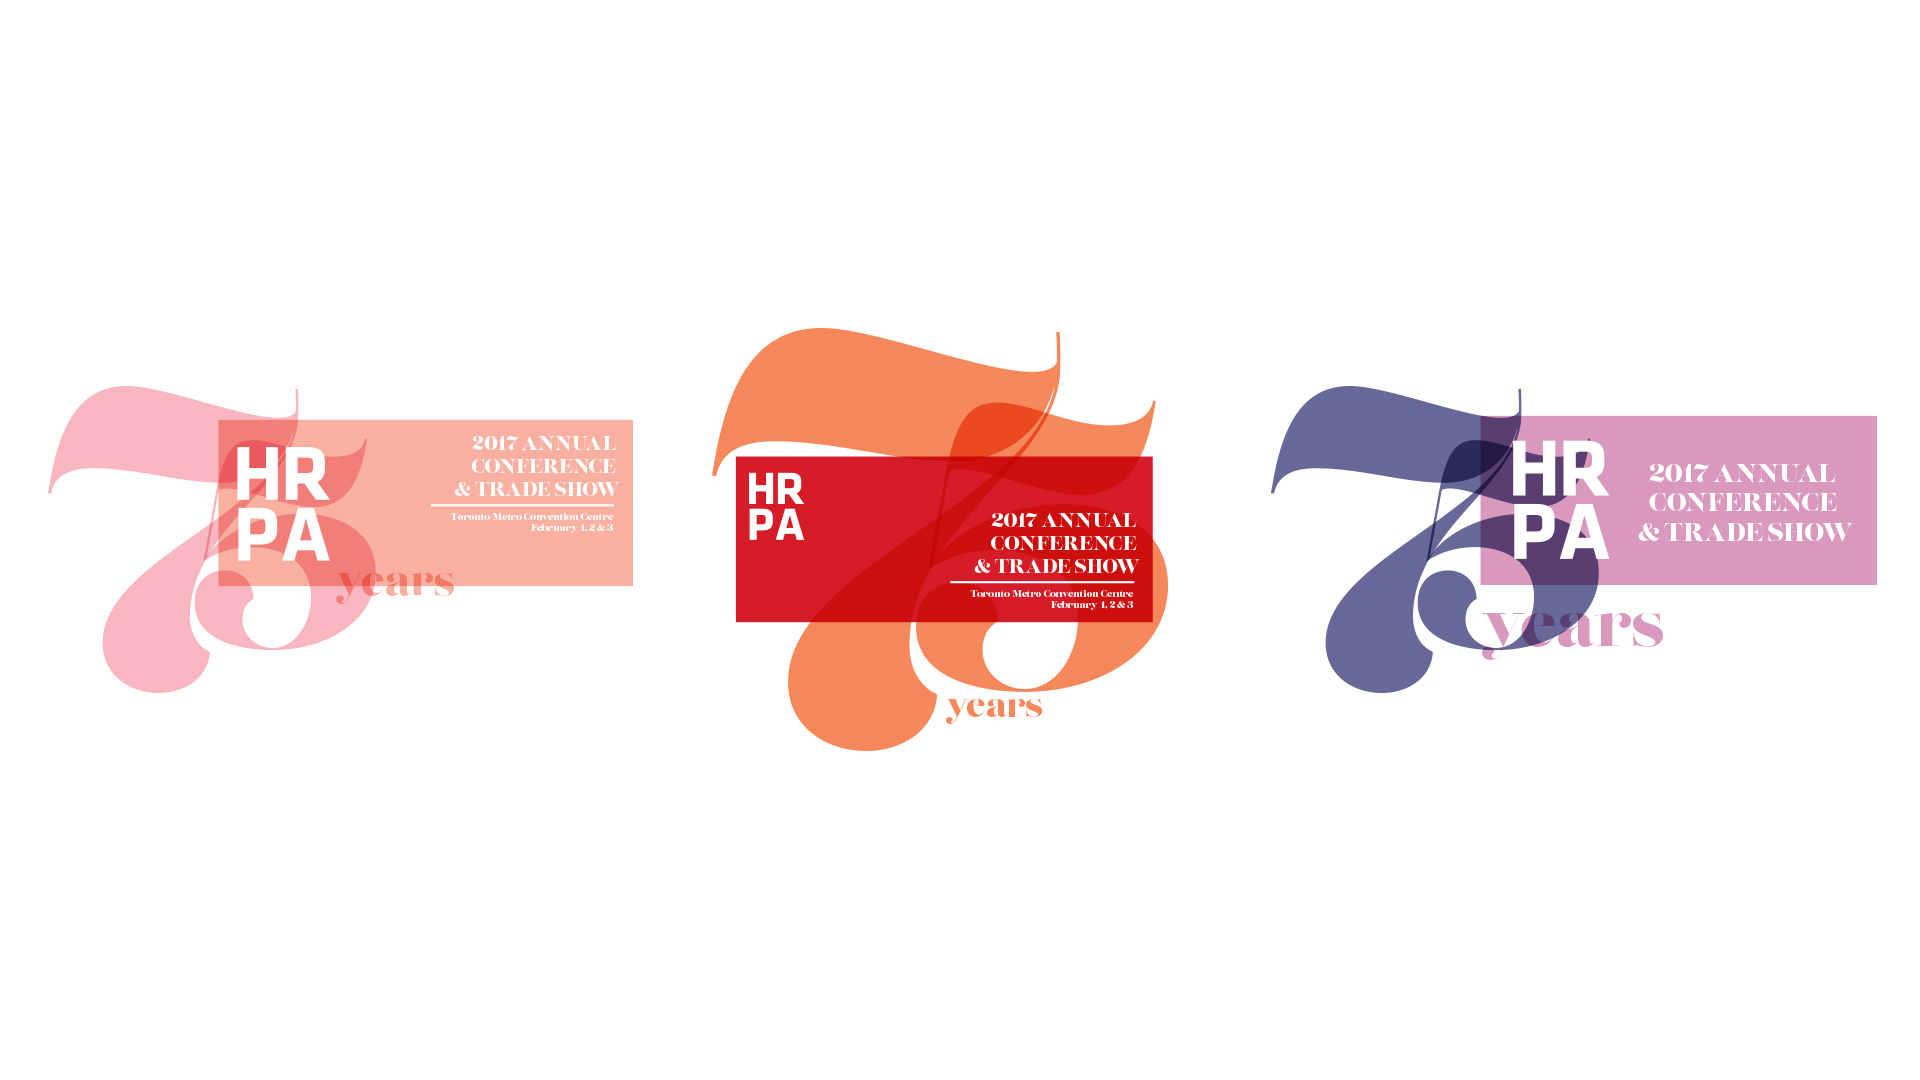 HRPA 75th Annual Conference Logo Concepts by Brad Dawson on Dribbble